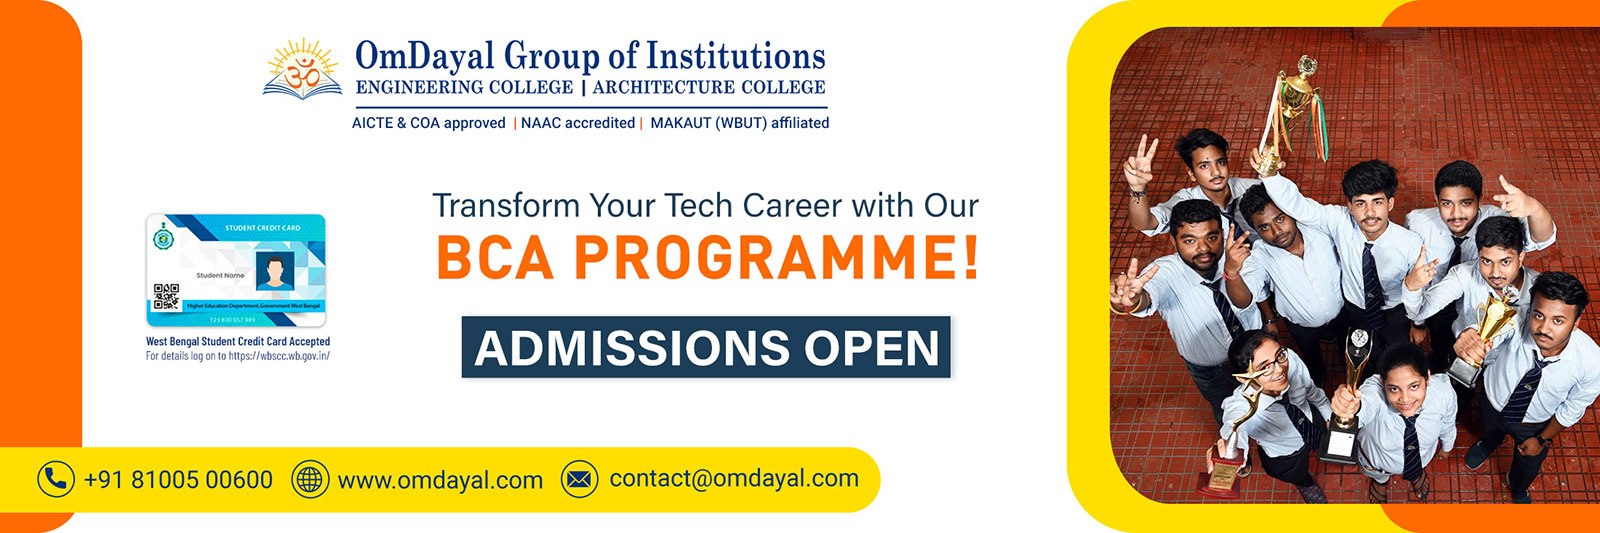 Admissions Open BCA